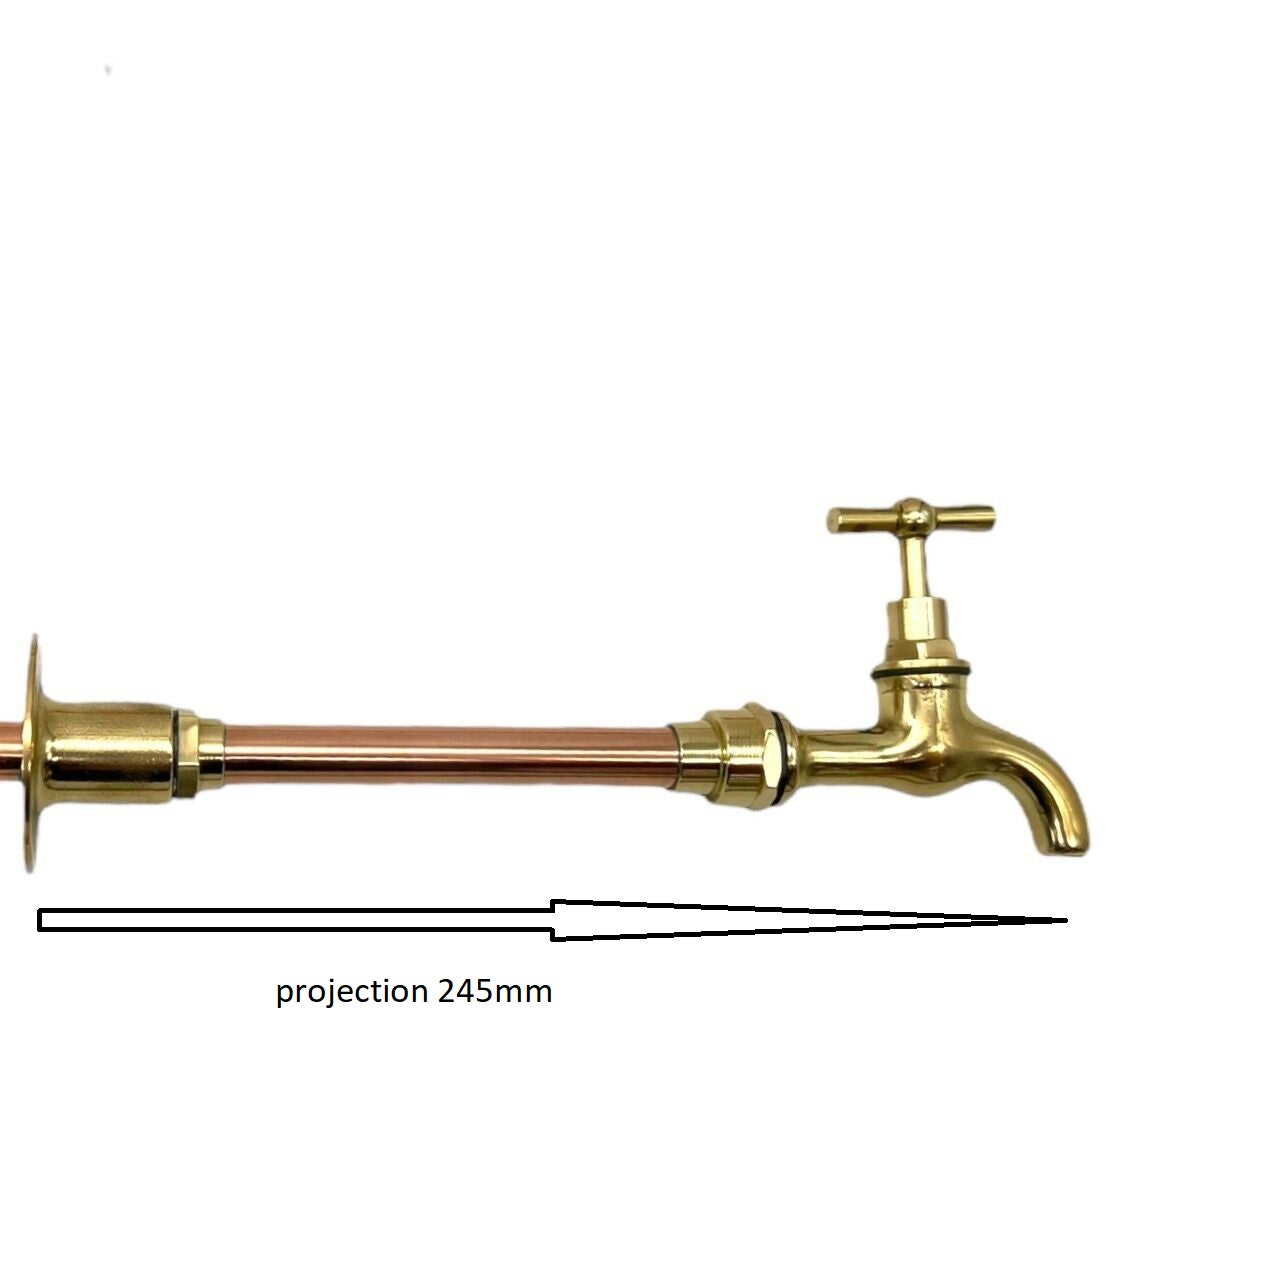 Vintage Style Brass Wall Mounted Taps, Vintage Style Brass and Copper Wall Taps (T17)